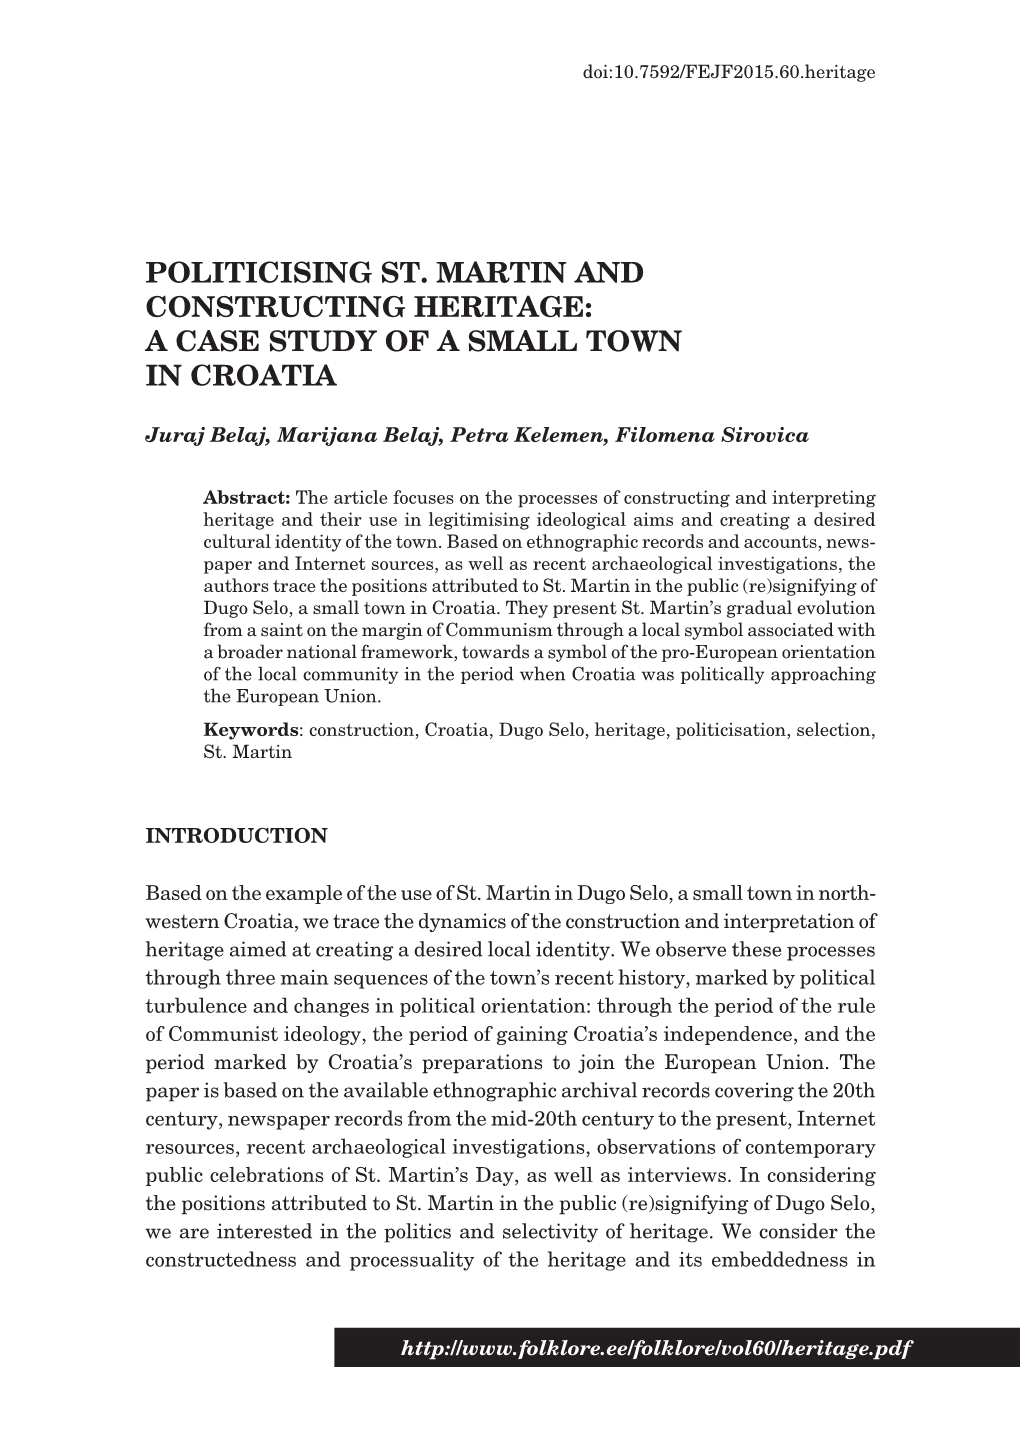 Politicising St. Martin and Constructing Heritage: a Case Study of a Small Town in Croatia